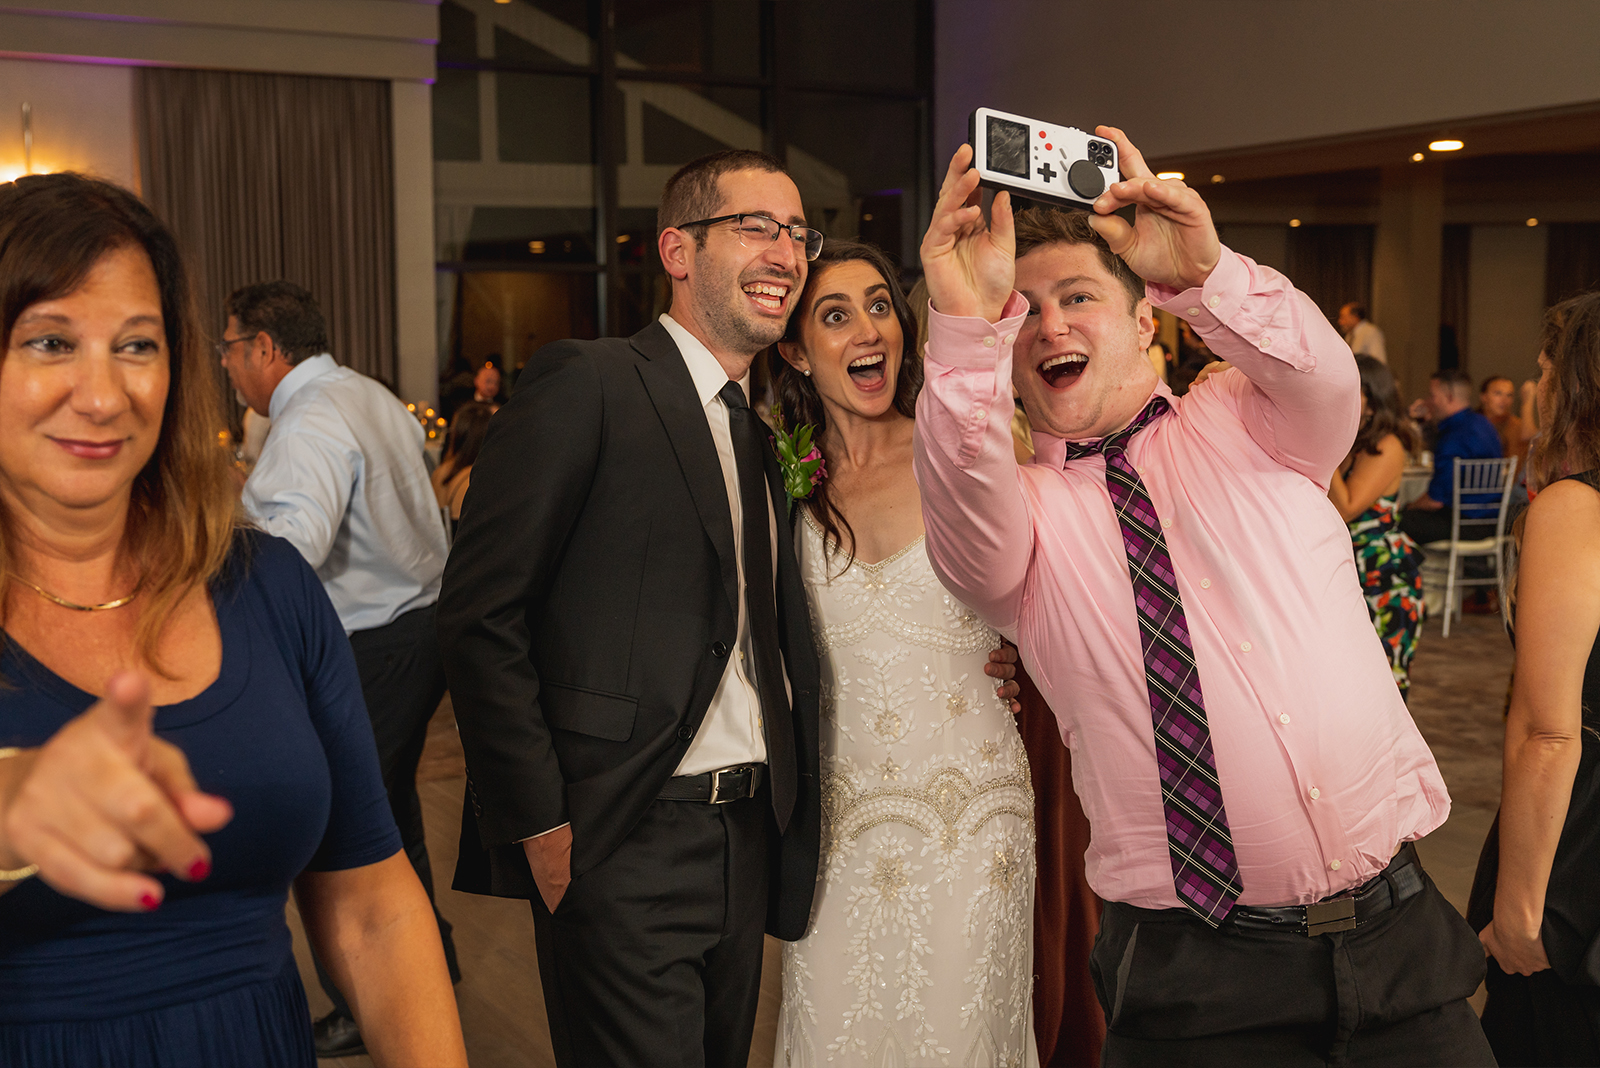 Bride and groom with friend taking selfie, smiling, fun, classy wedding reception at Landerhaven, Mayfield Heights OH